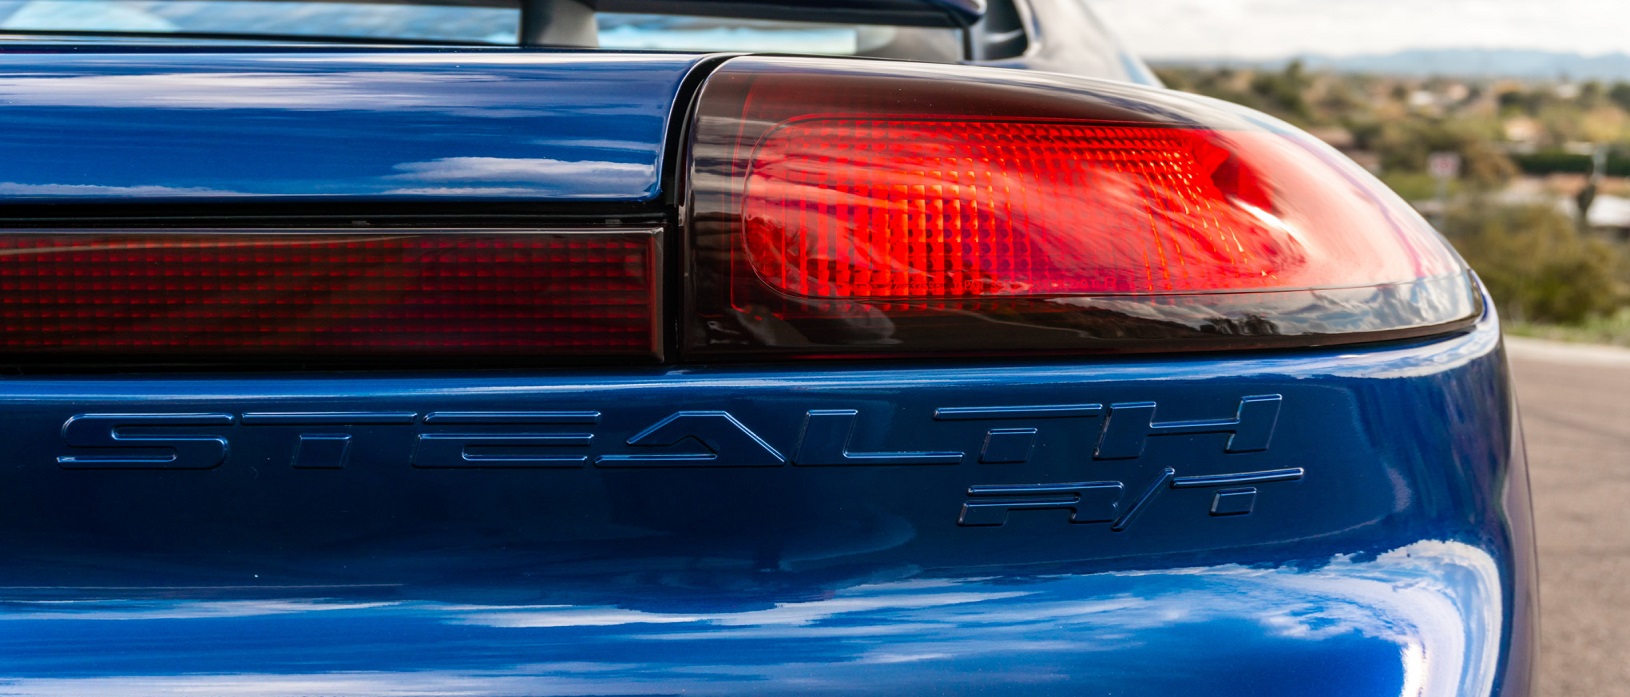 Tail light of blue Dodge Stealth